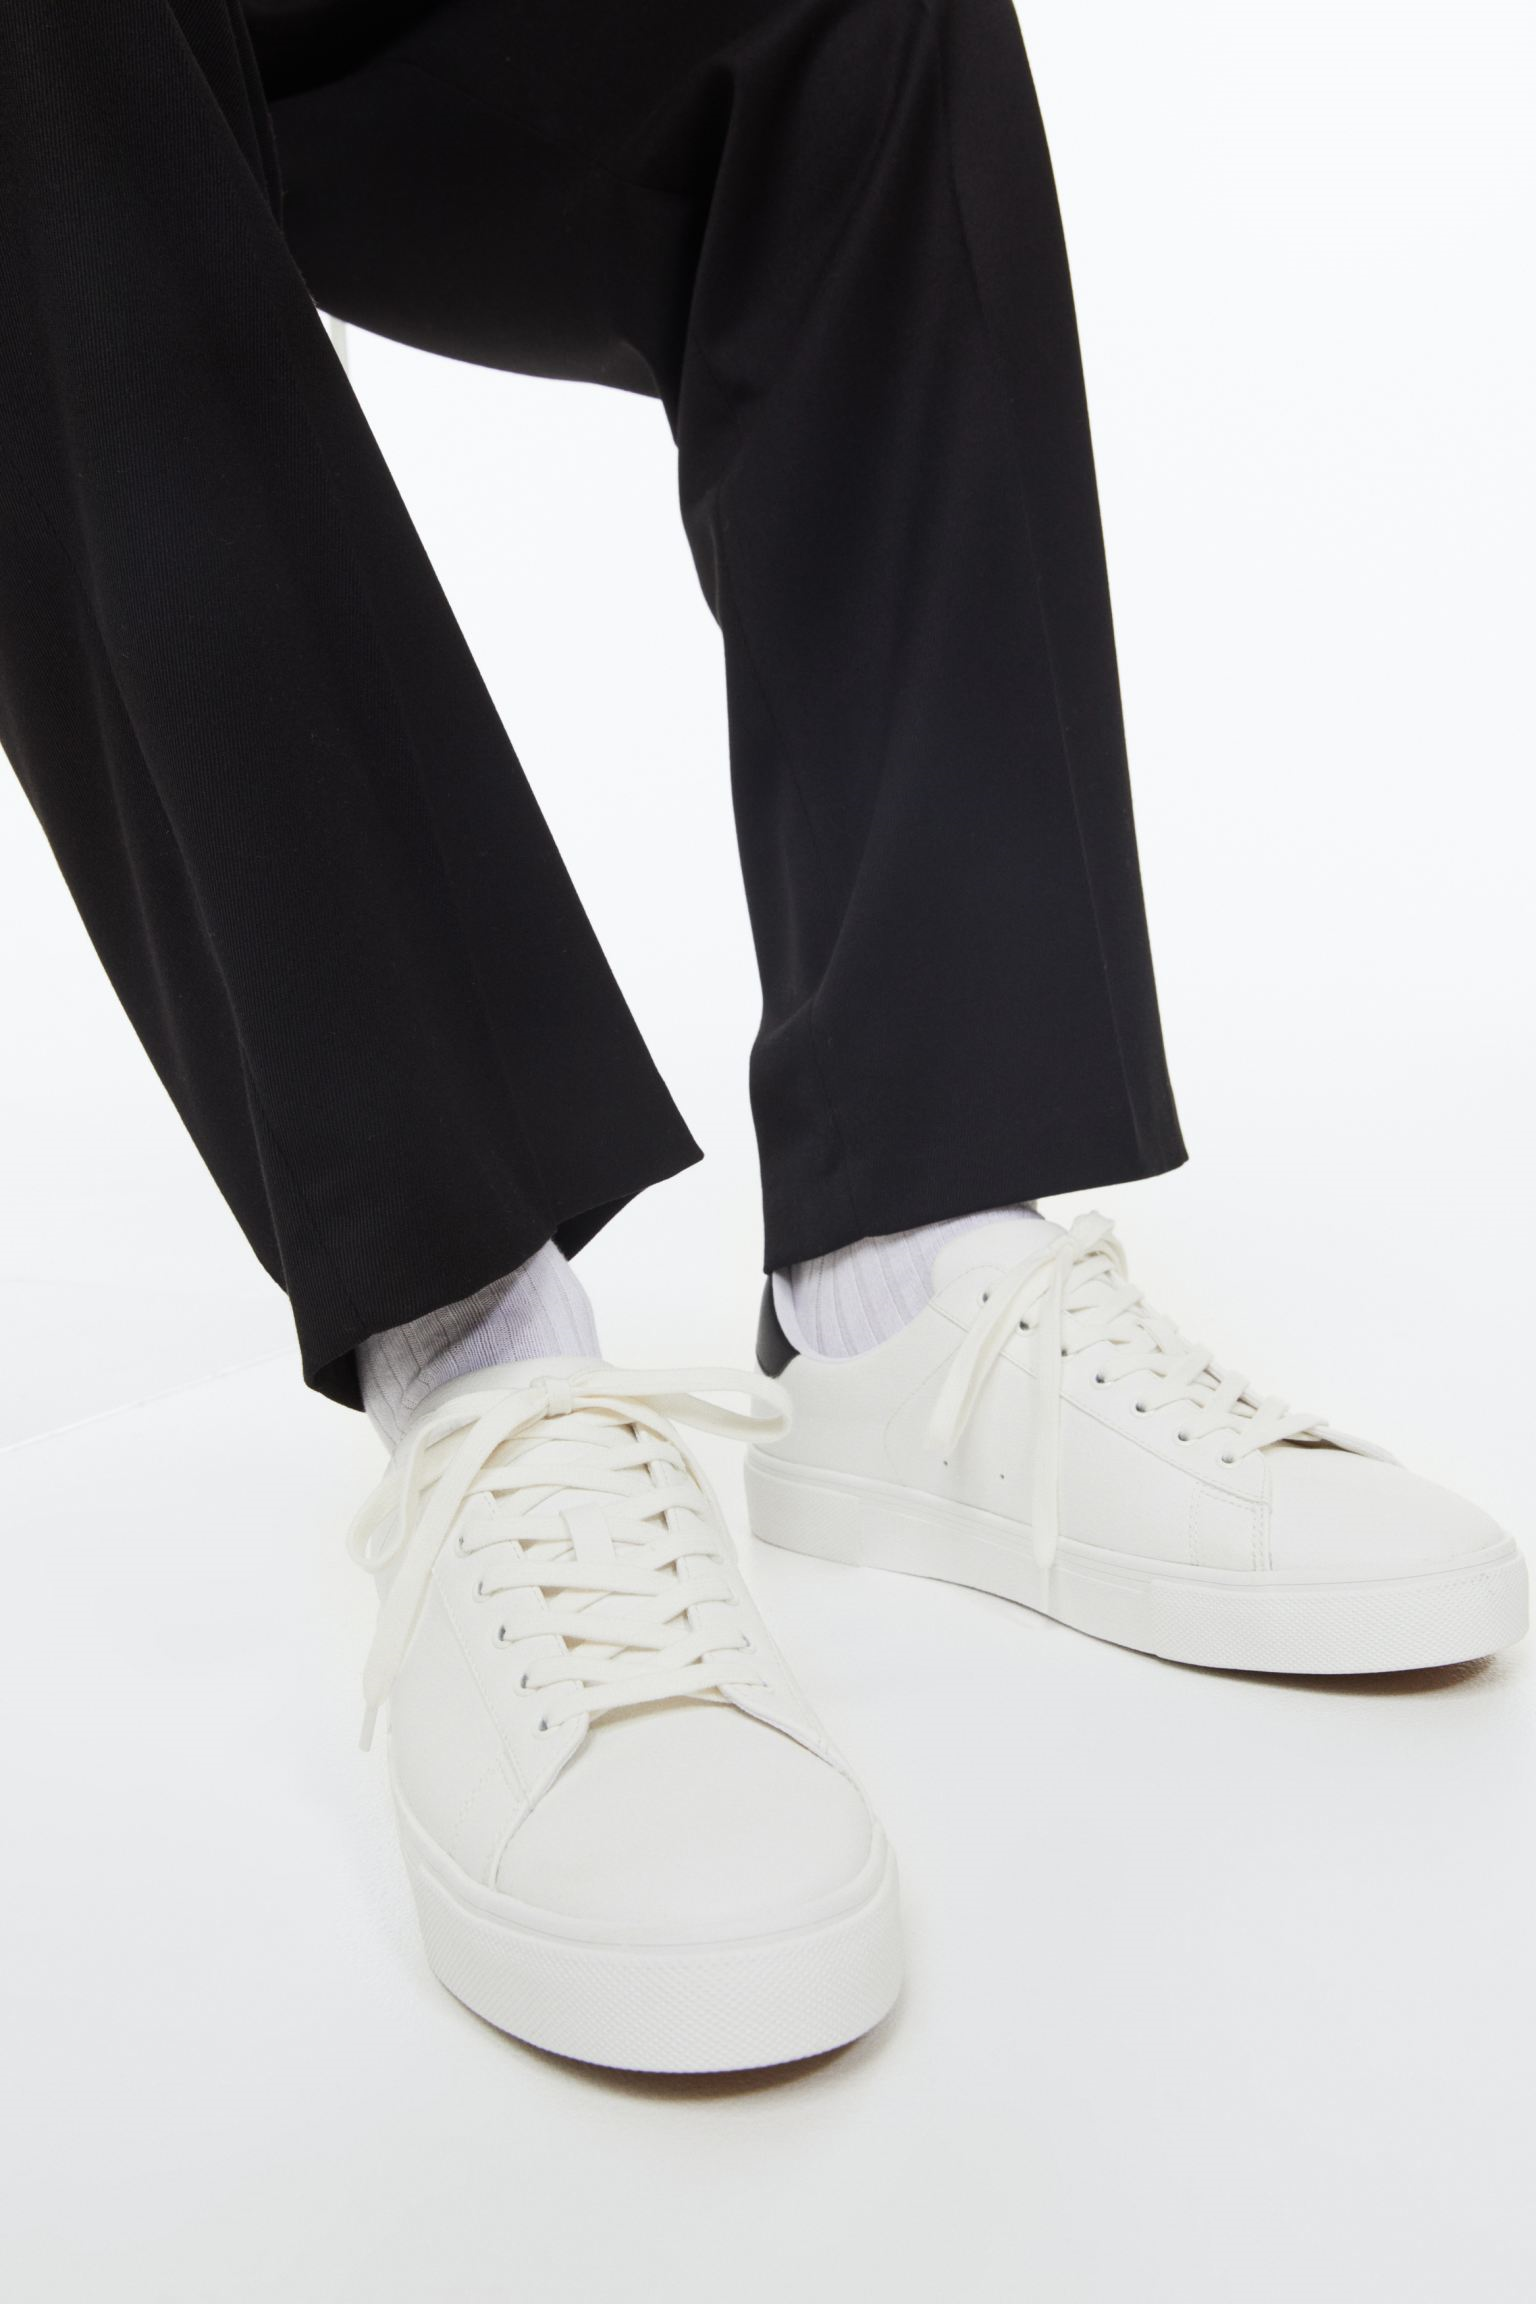 close-up image of a model wearing black pants and white sneakers